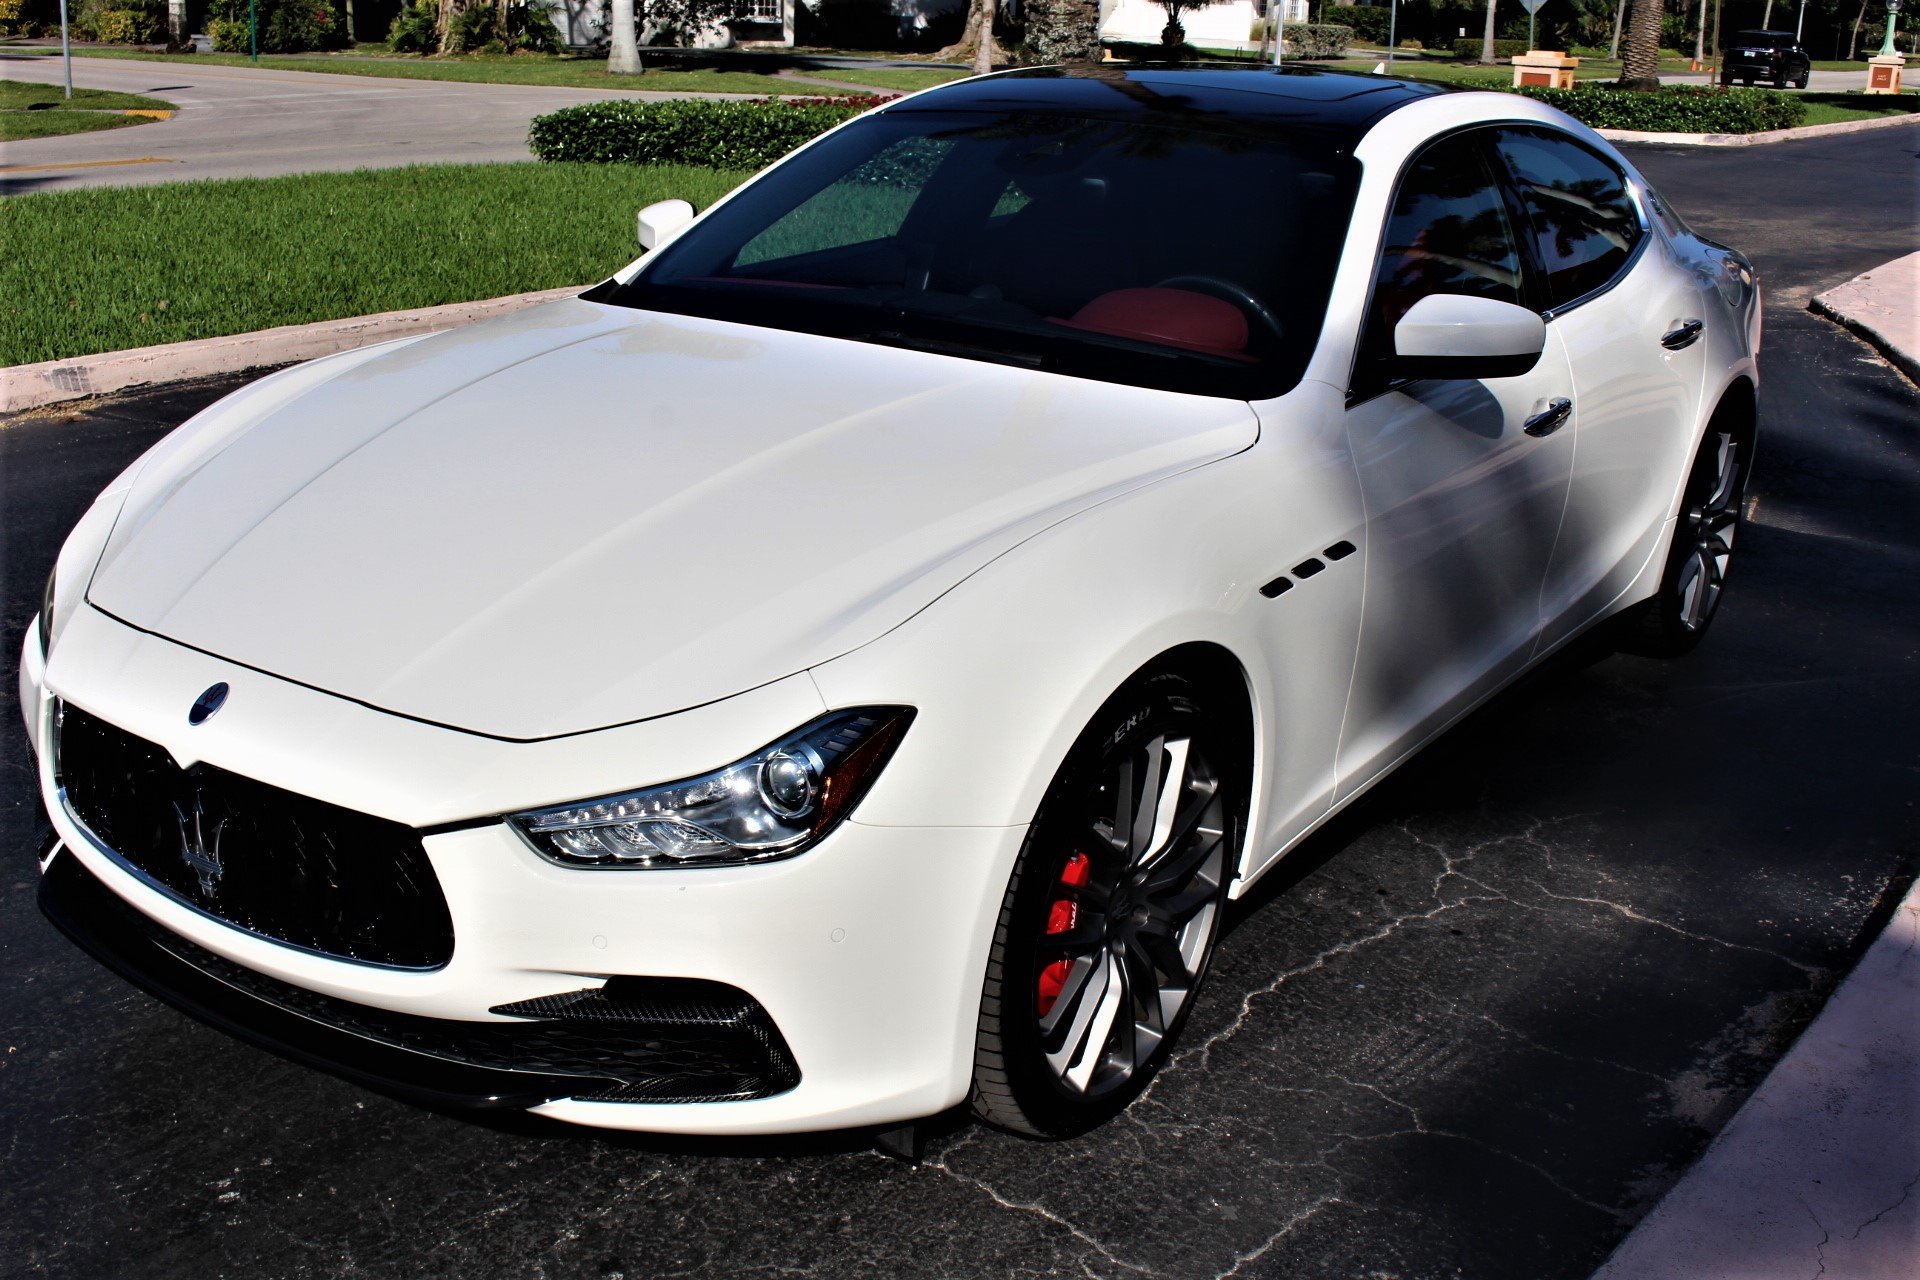 Used 2017 Maserati Ghibli S S for sale Sold at The Gables Sports Cars in Miami FL 33146 2